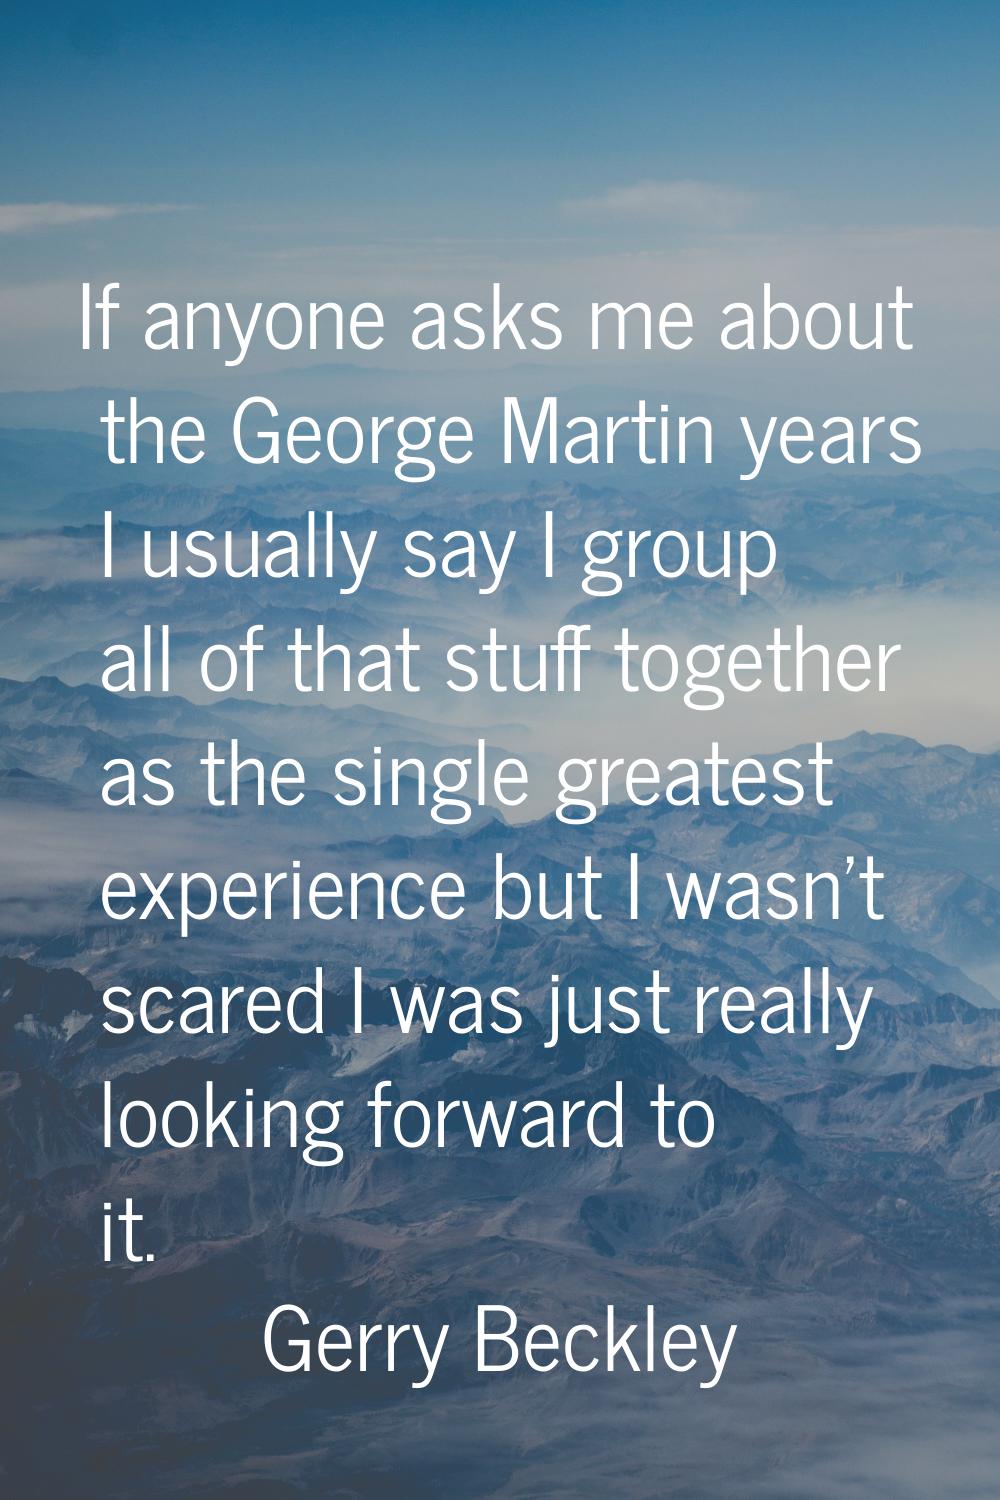 If anyone asks me about the George Martin years I usually say I group all of that stuff together as